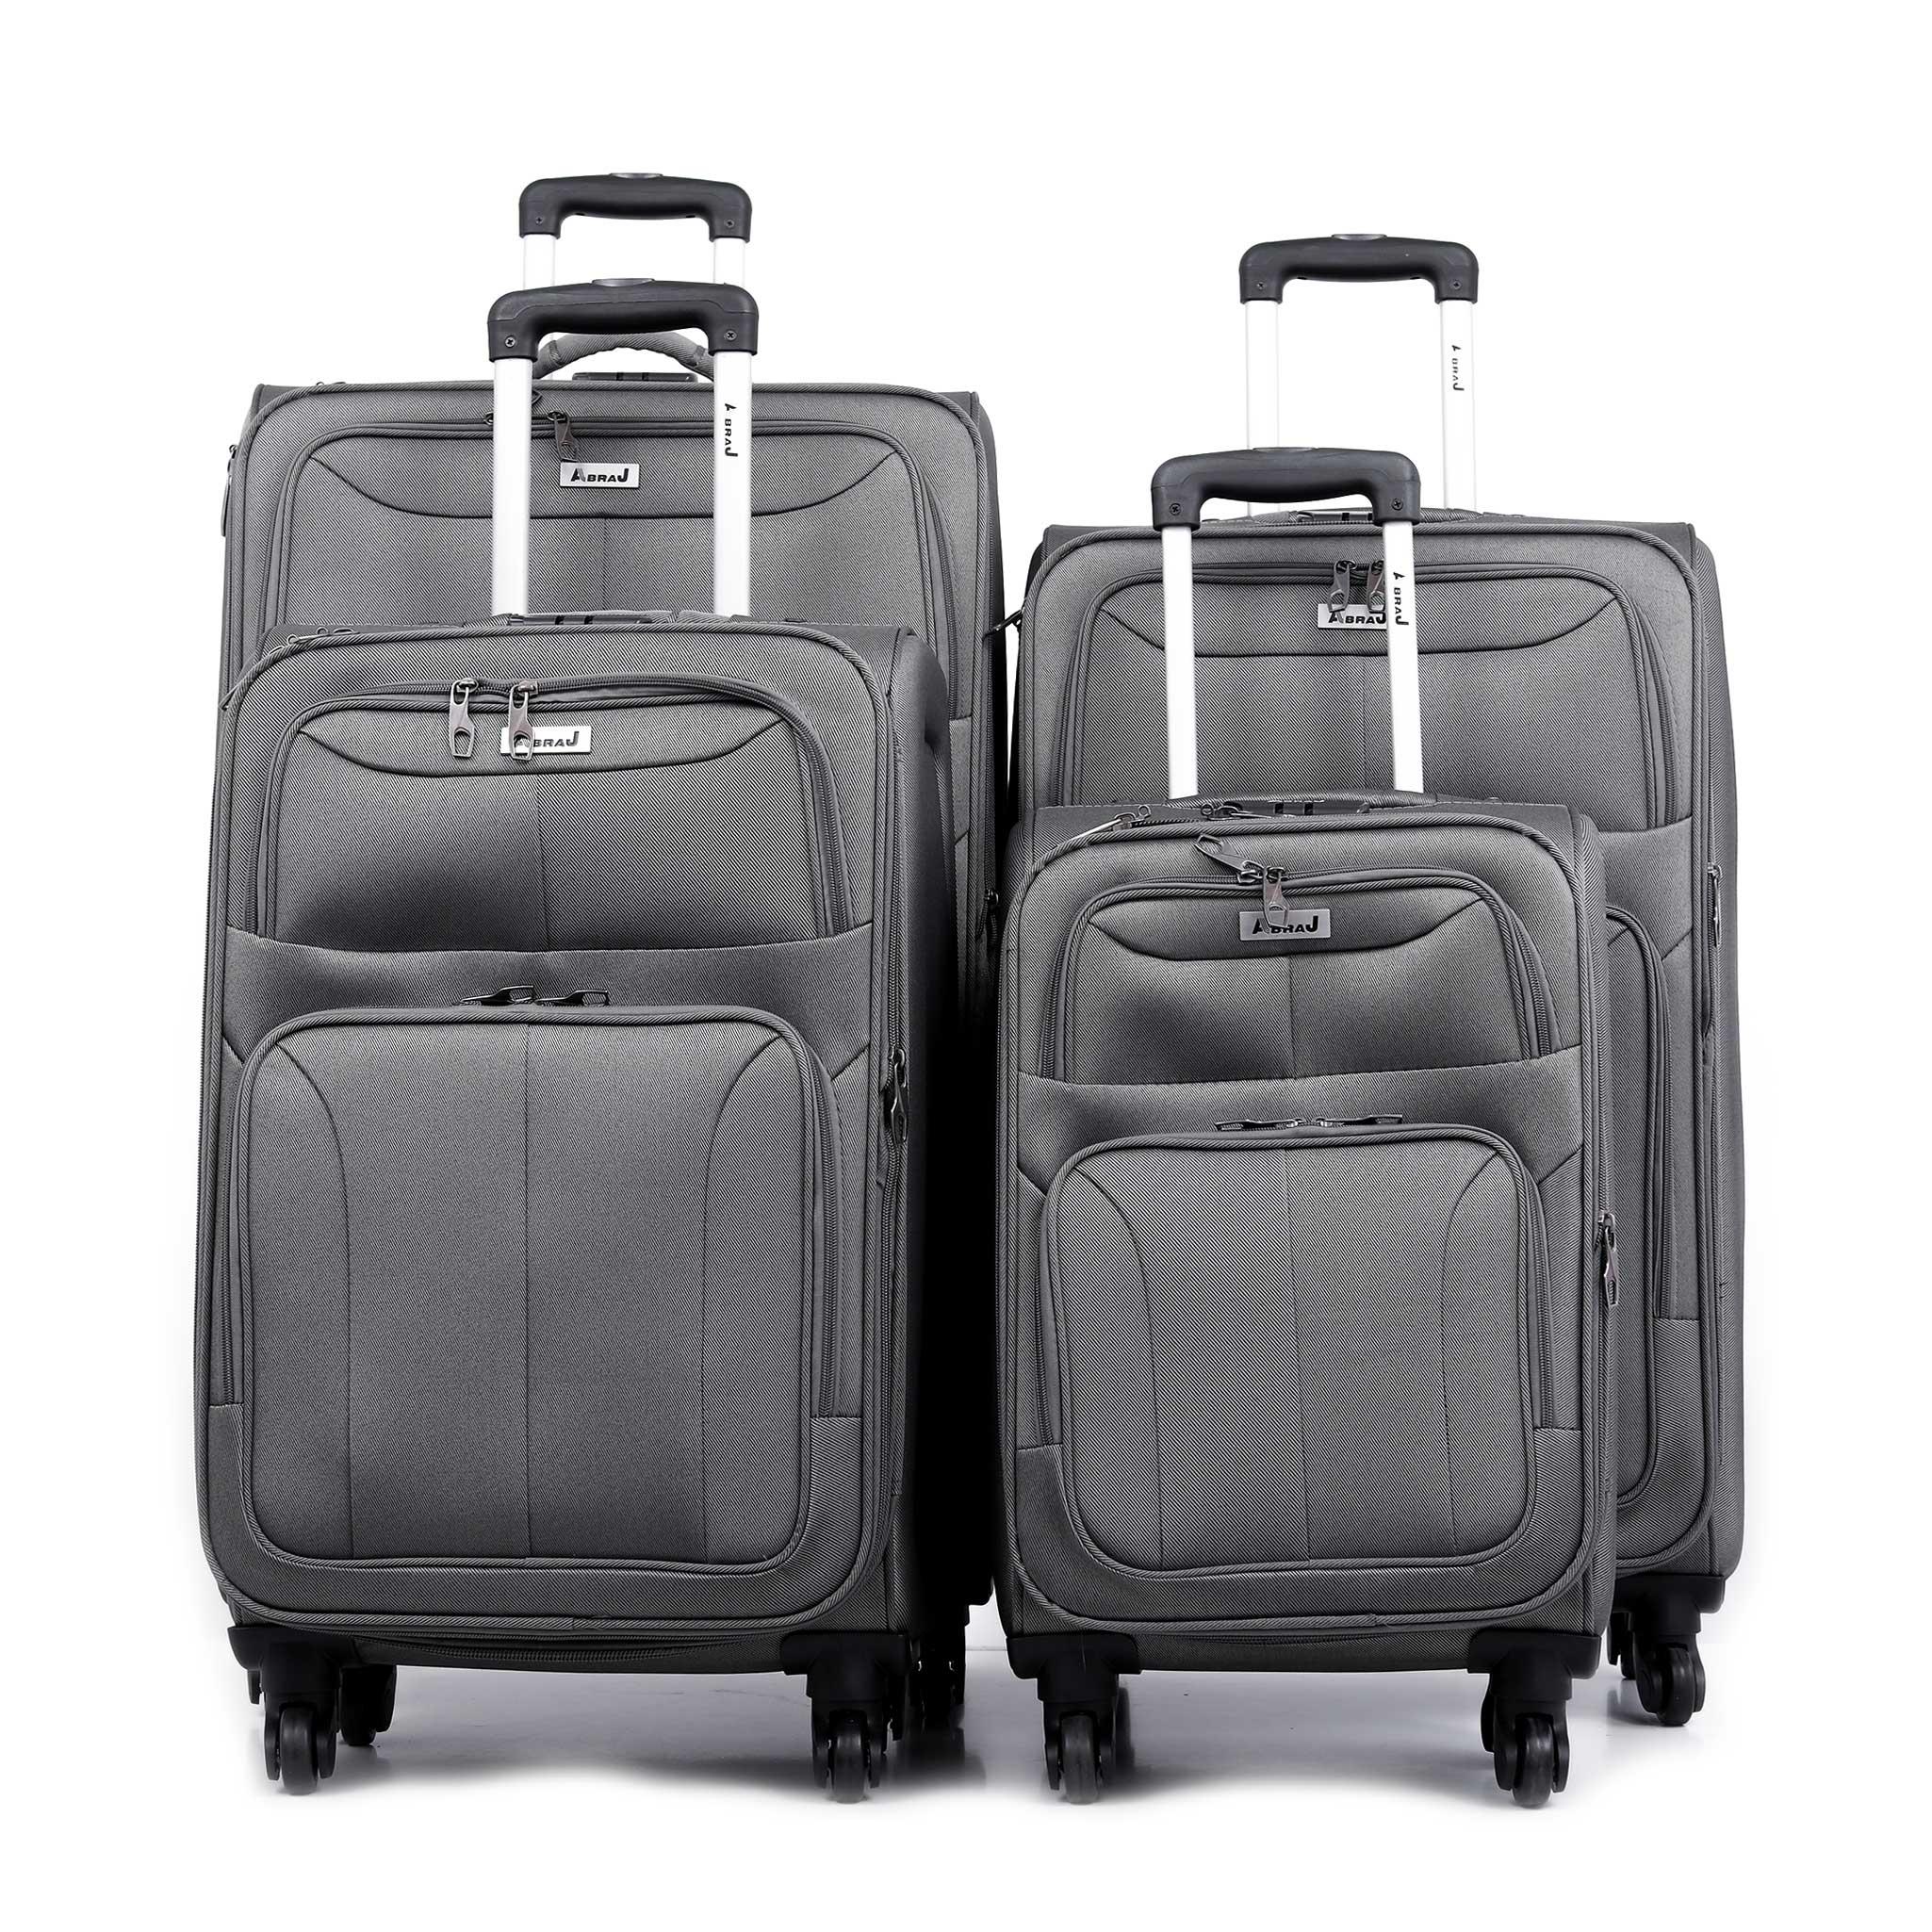 ABRAJ Travel Luggage Suitcase Set of 4 - Trolley Bag, Carry On Hand Cabin Luggage Bag - Lightweight Travel Bags with 360 Durable 4 Spinner Wheels - Hard Shell Luggage Spinner (20'', 24'', 2